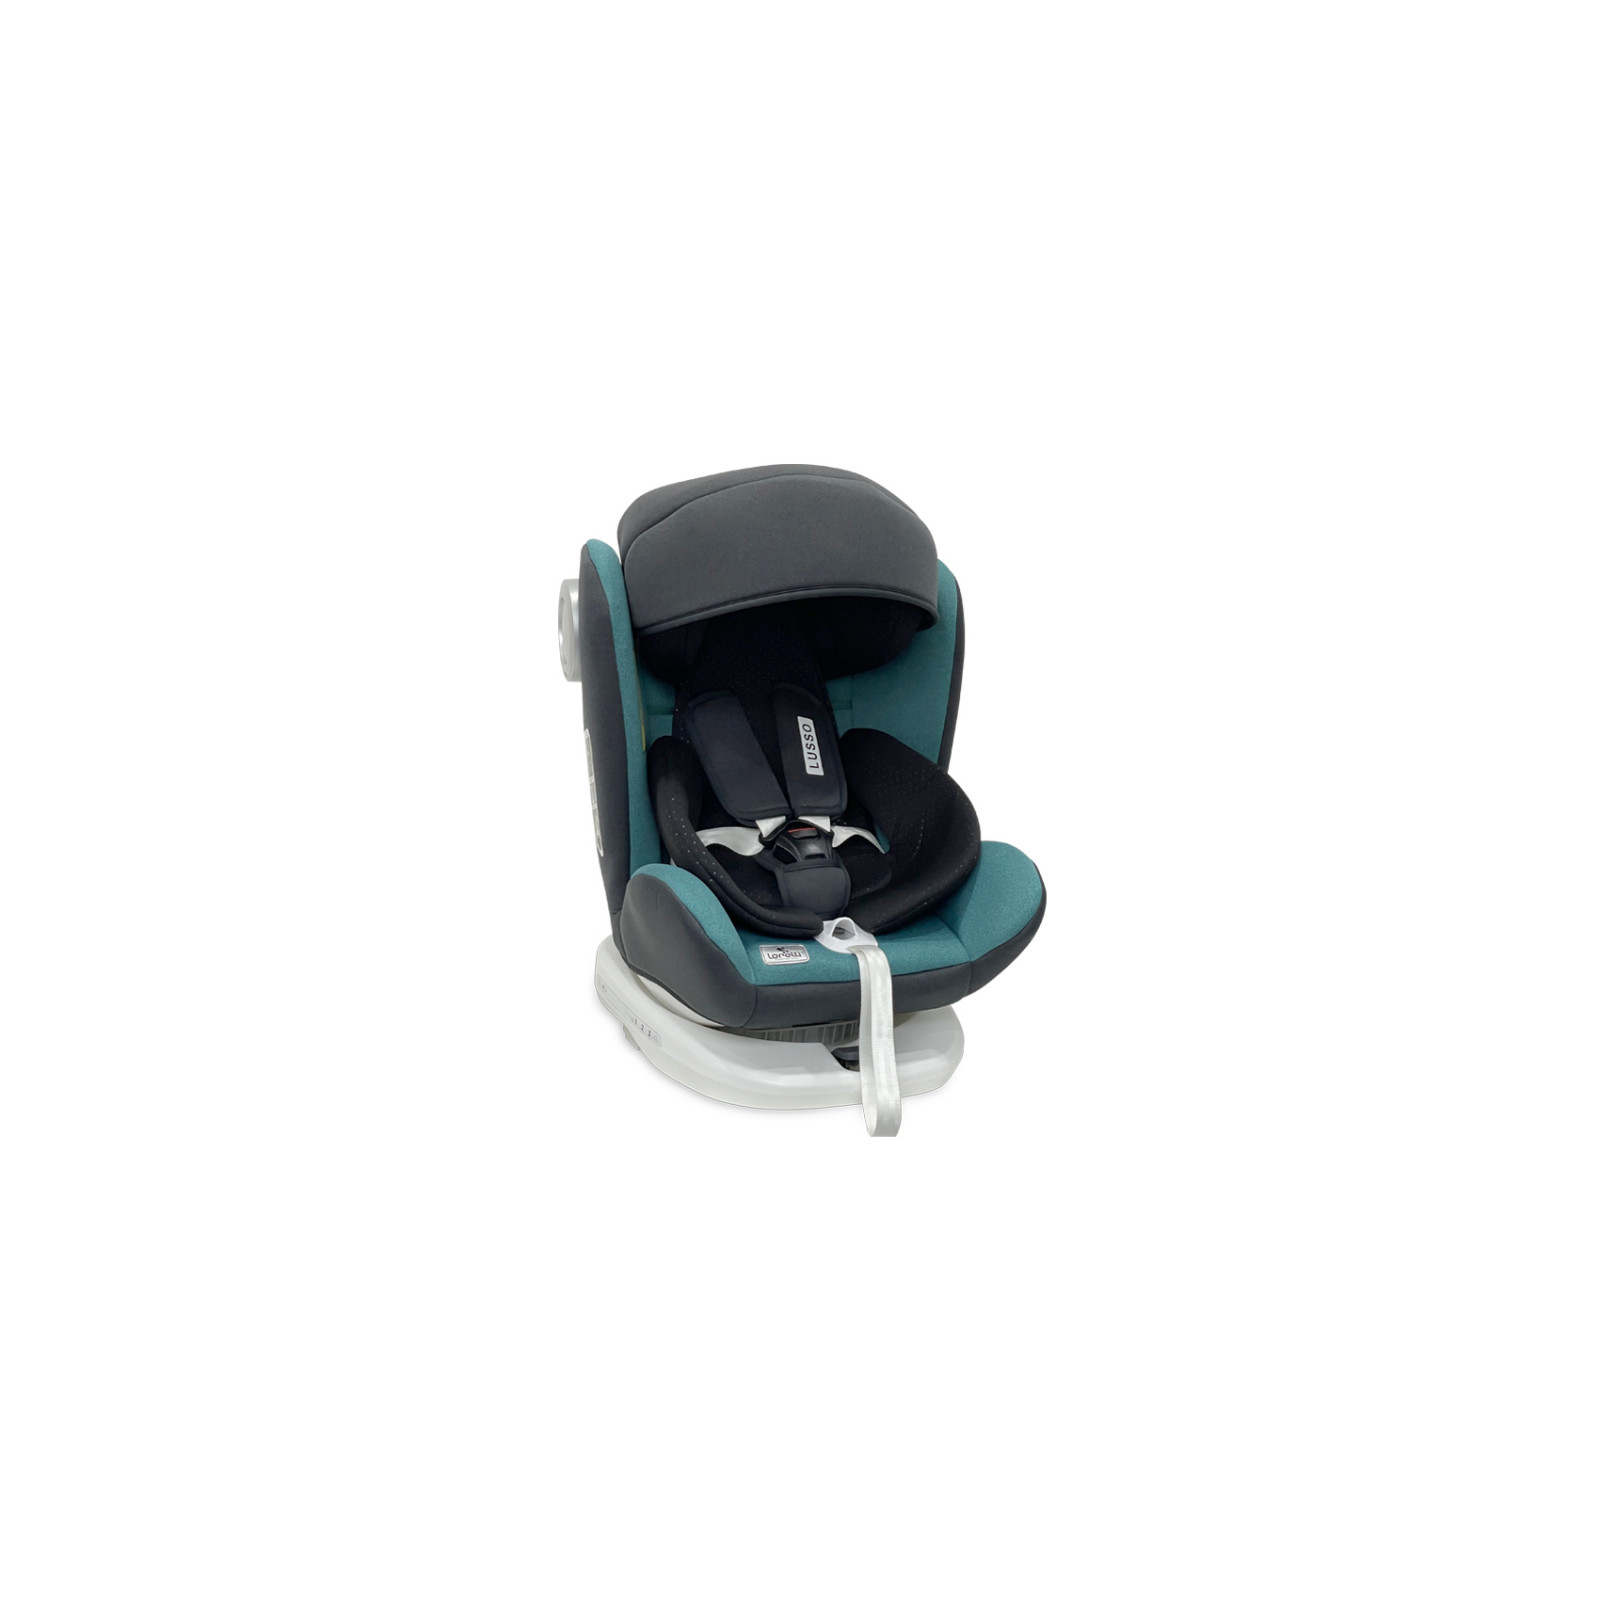 Автокрісло Lorelli LUSSO SPS ISOFIX 0-36кг brittany blue (LUSSO brittany blue)